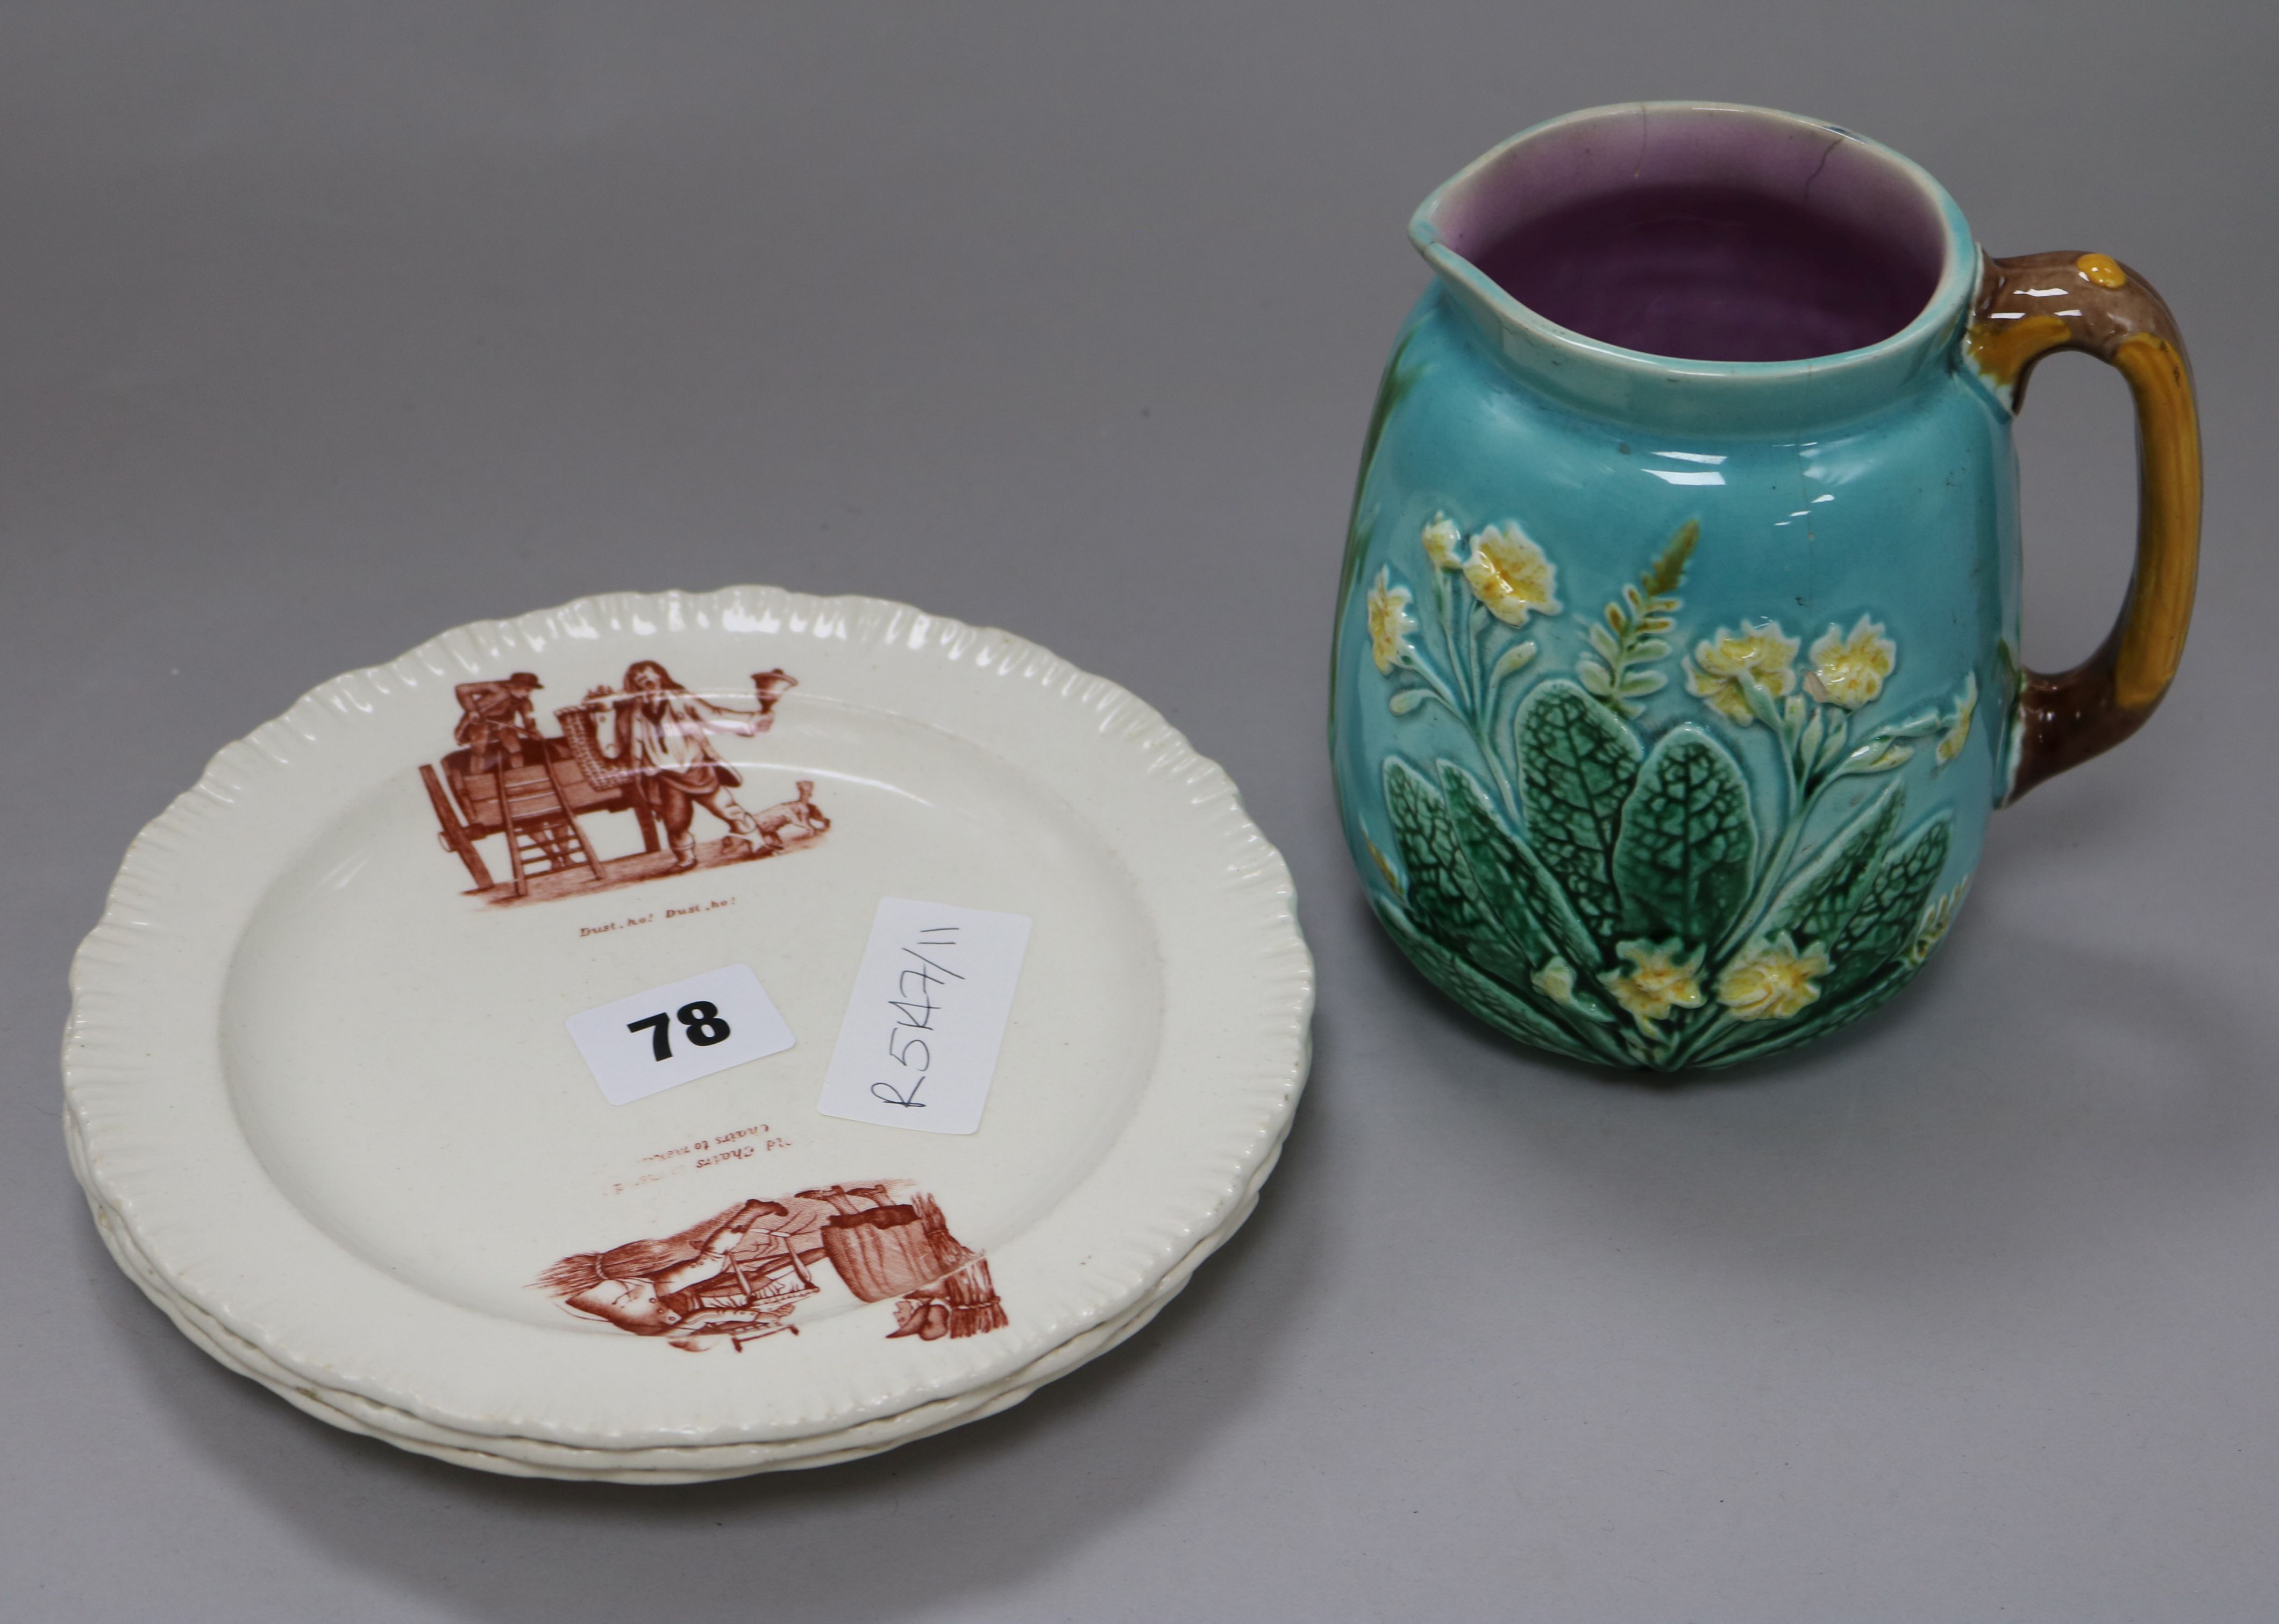 A Victorian Wedgwood Majolica jug, and a set of three plates printed with the Cries of London, jug